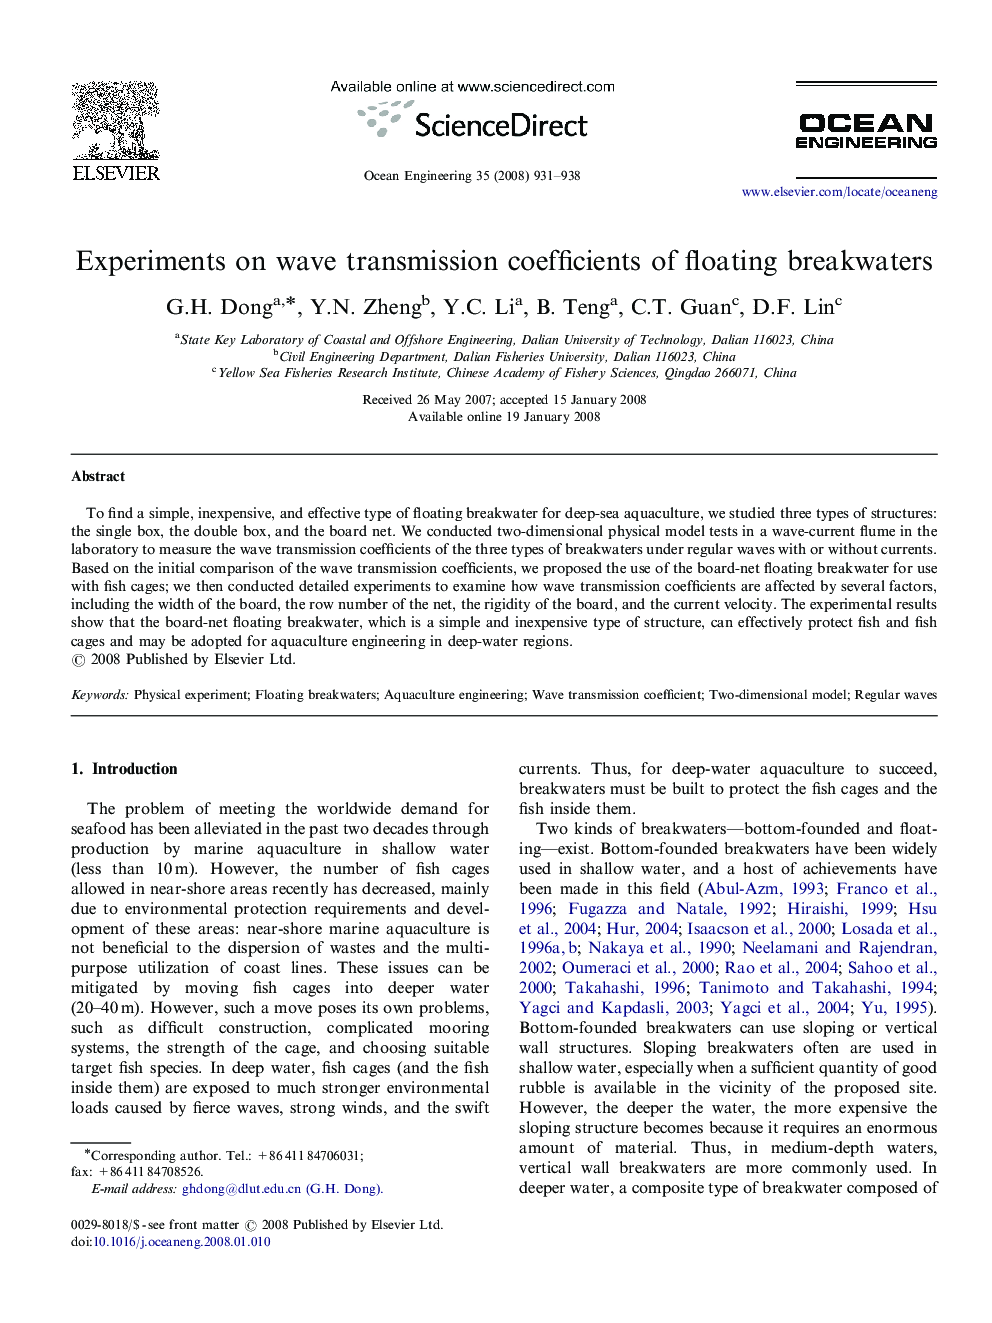 Experiments on wave transmission coefficients of floating breakwaters